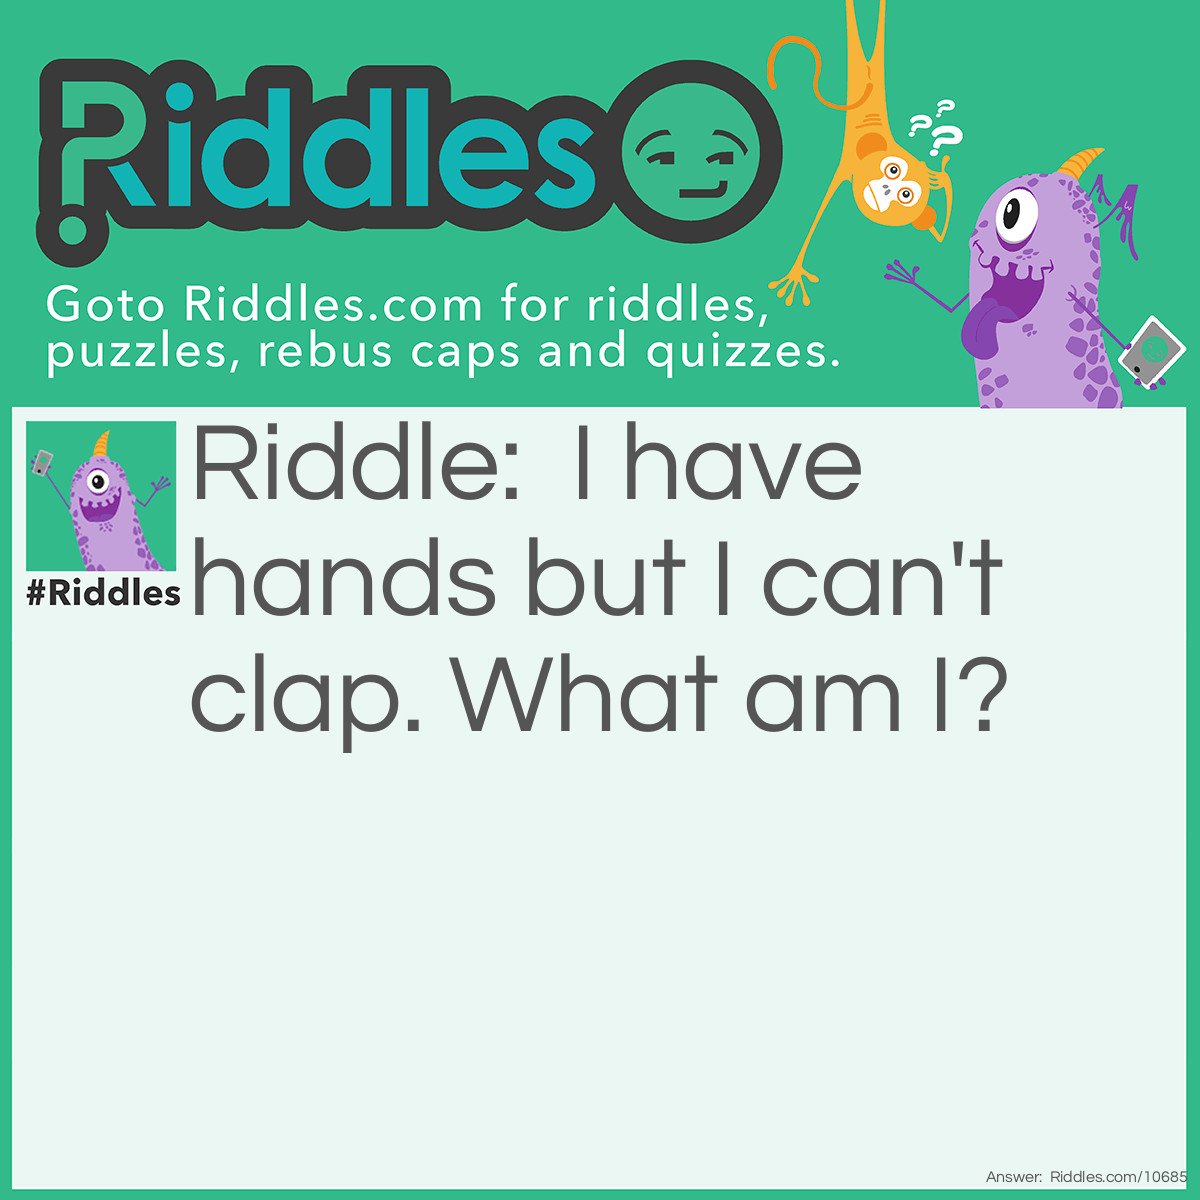 Riddle: I have hands but I can't clap. What am I? Answer: A clock.